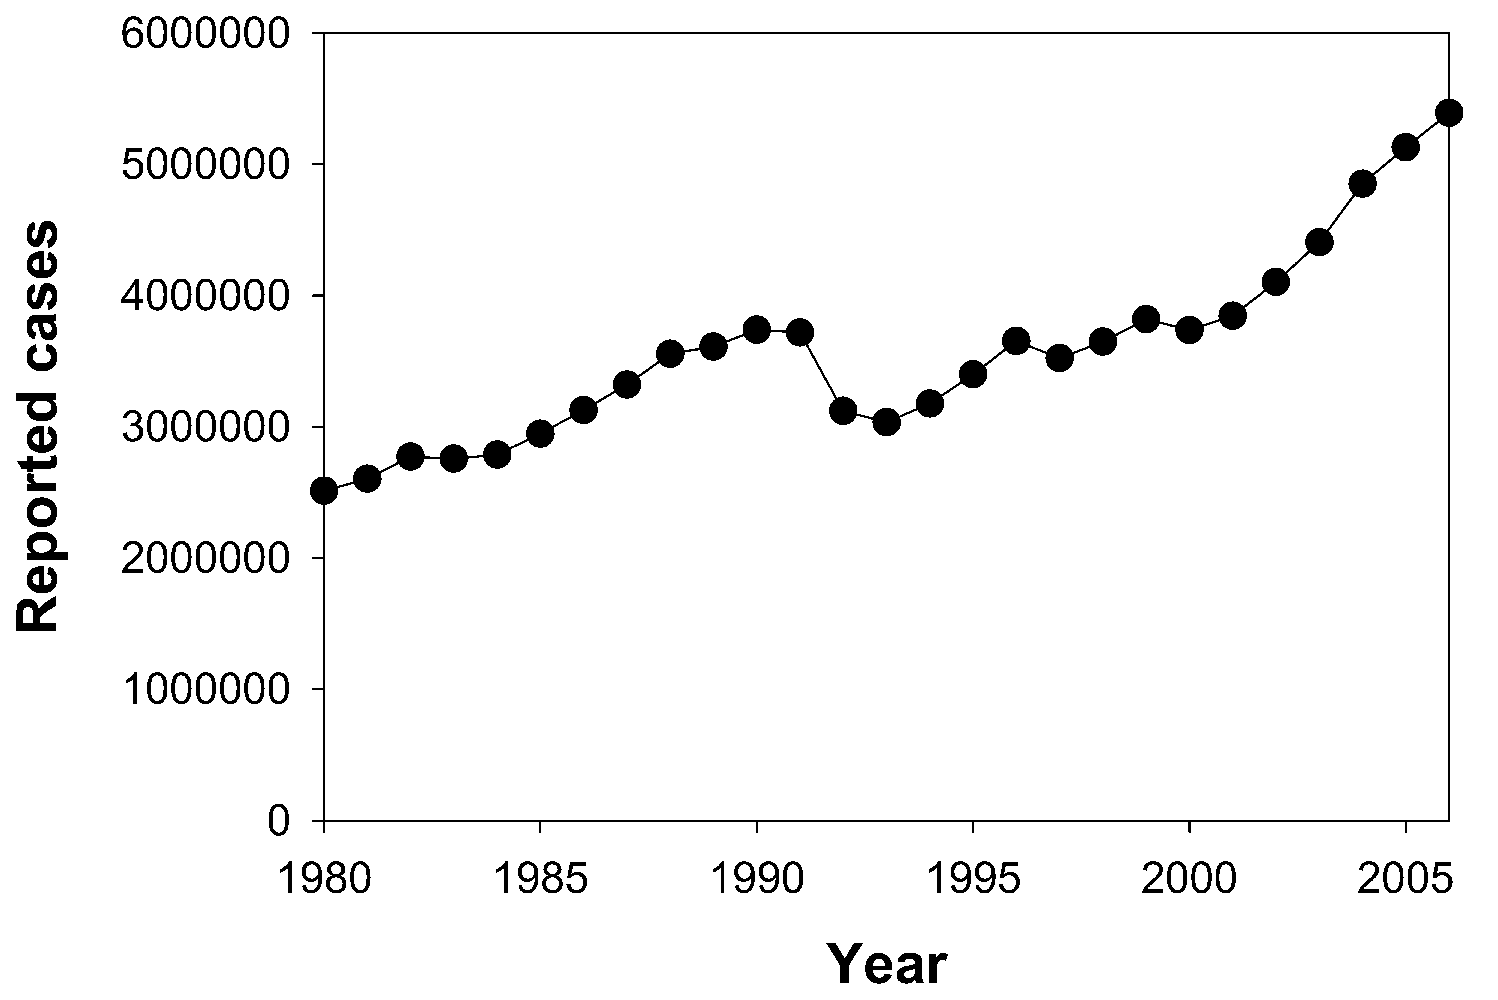 http://upload.wikimedia.org/wikipedia/commons/1/13/TB_incidence.png